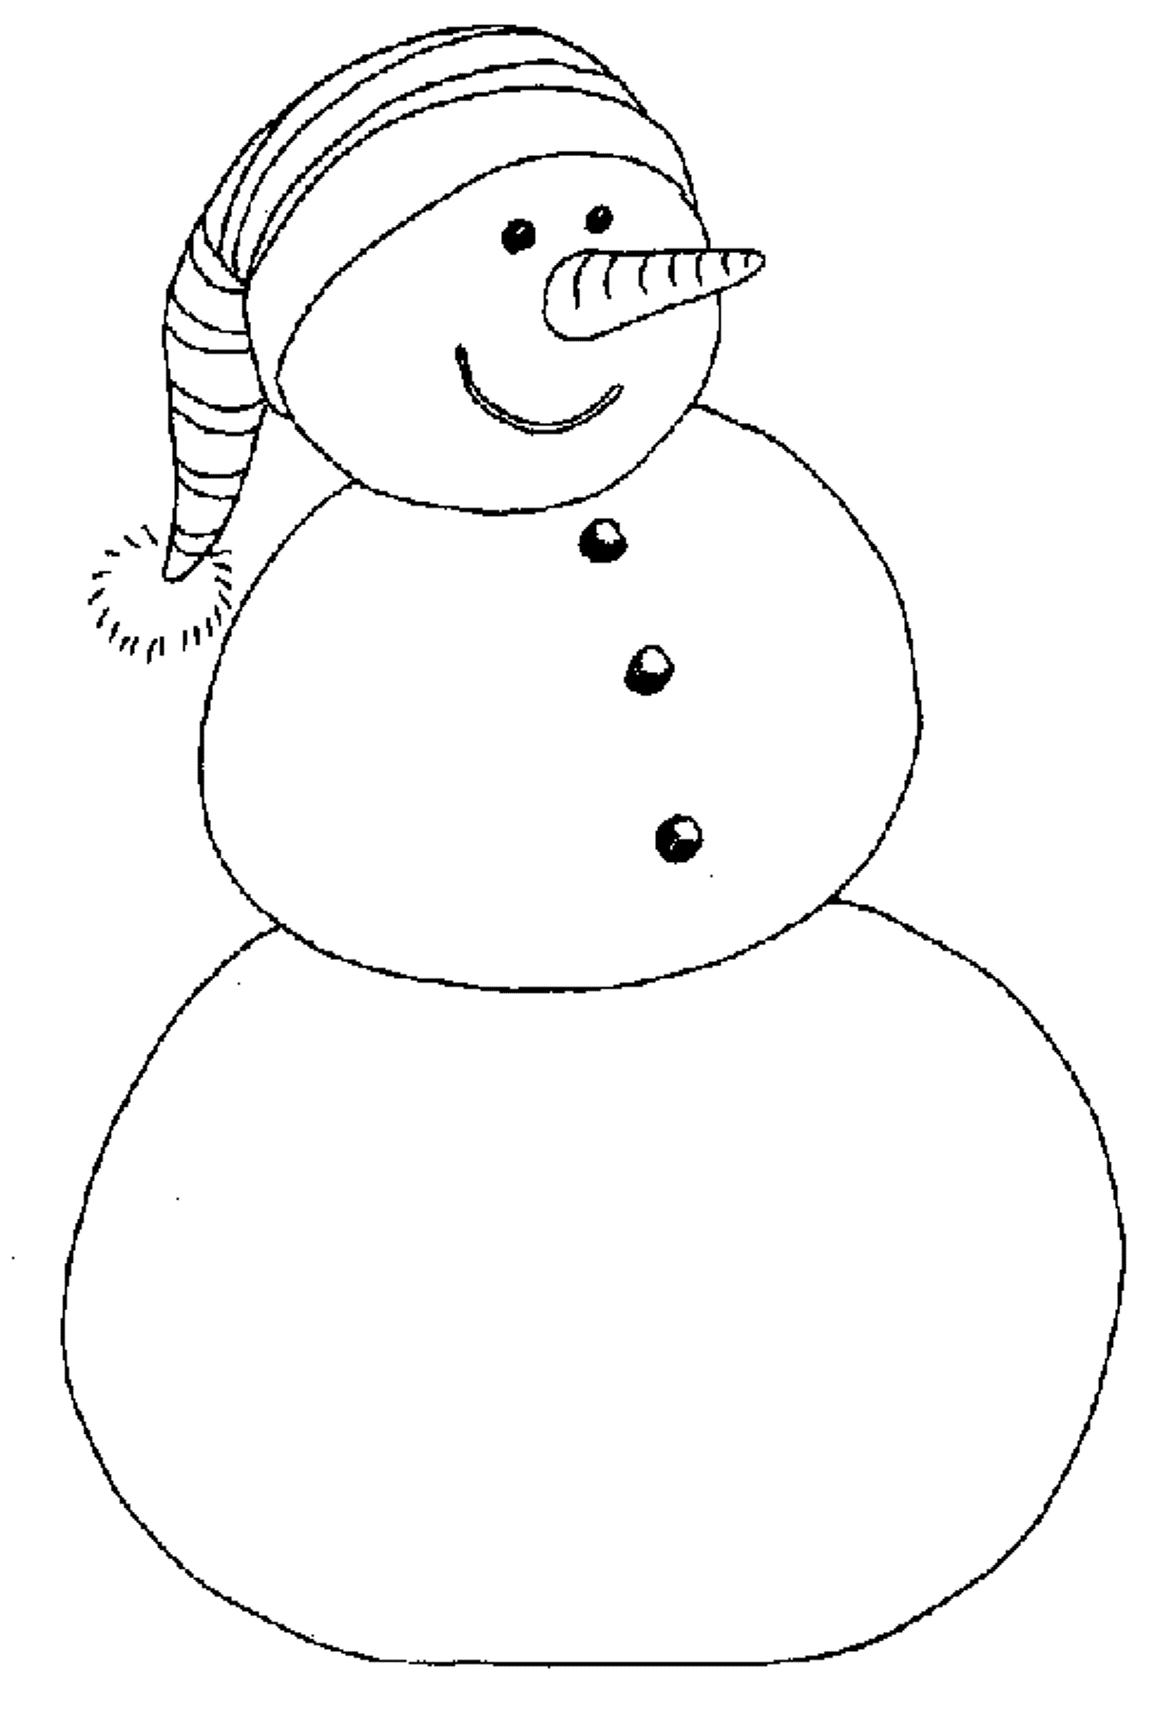 Of Snowman - Coloring Pages for Kids and for Adults